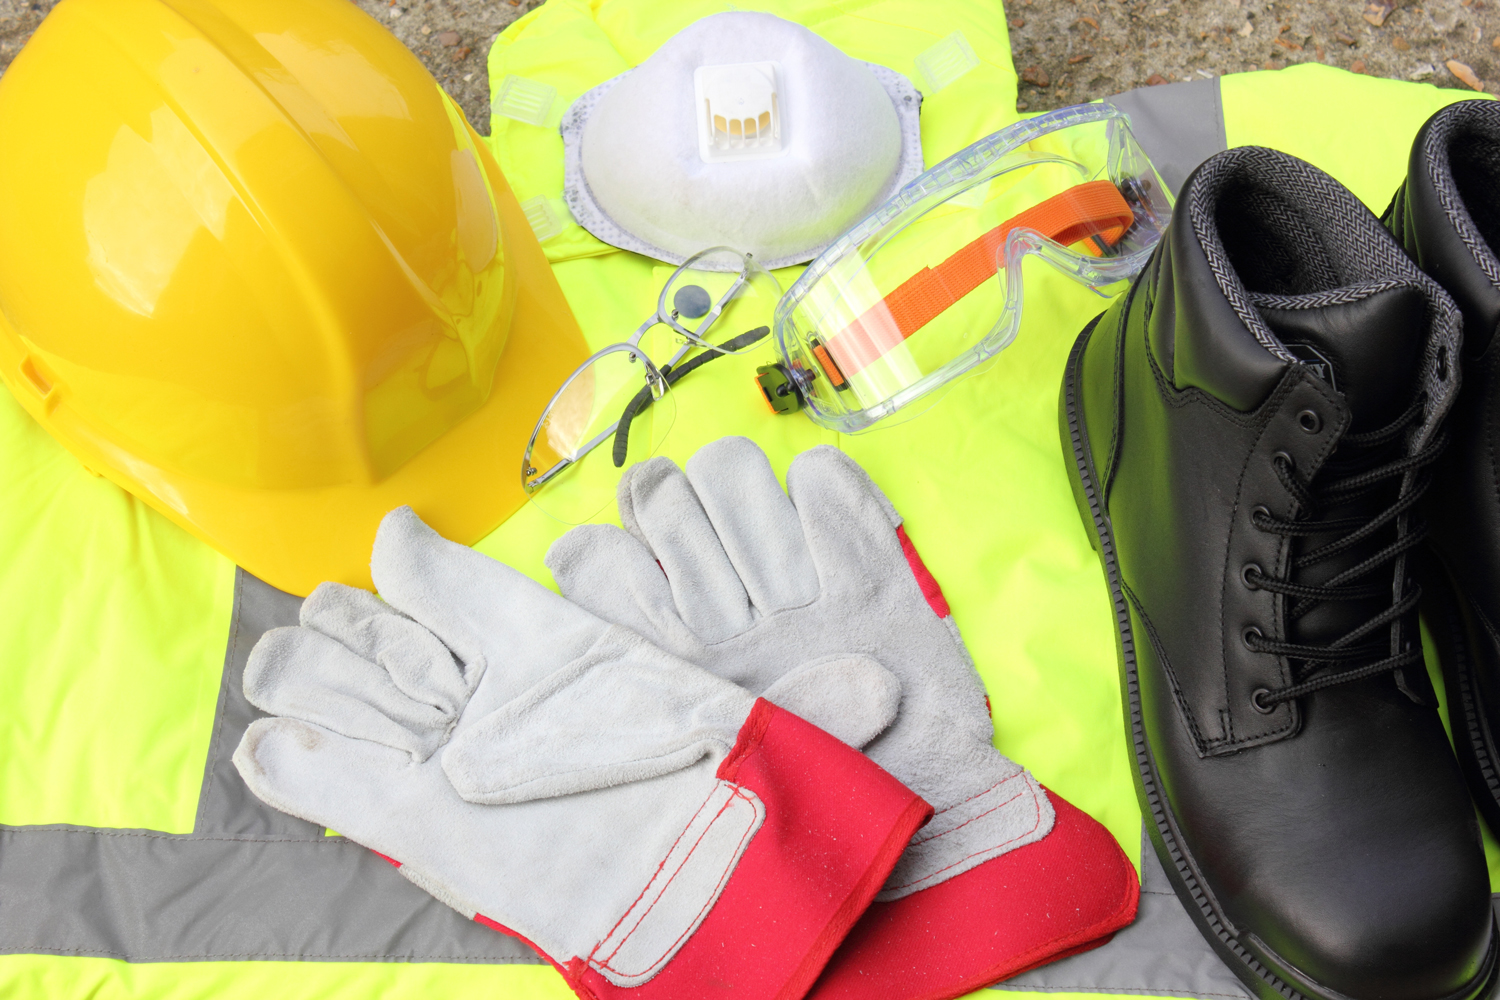 Safety products such as a yellow hard hat, gray gloves, protective eye wear, vest, and black boots.